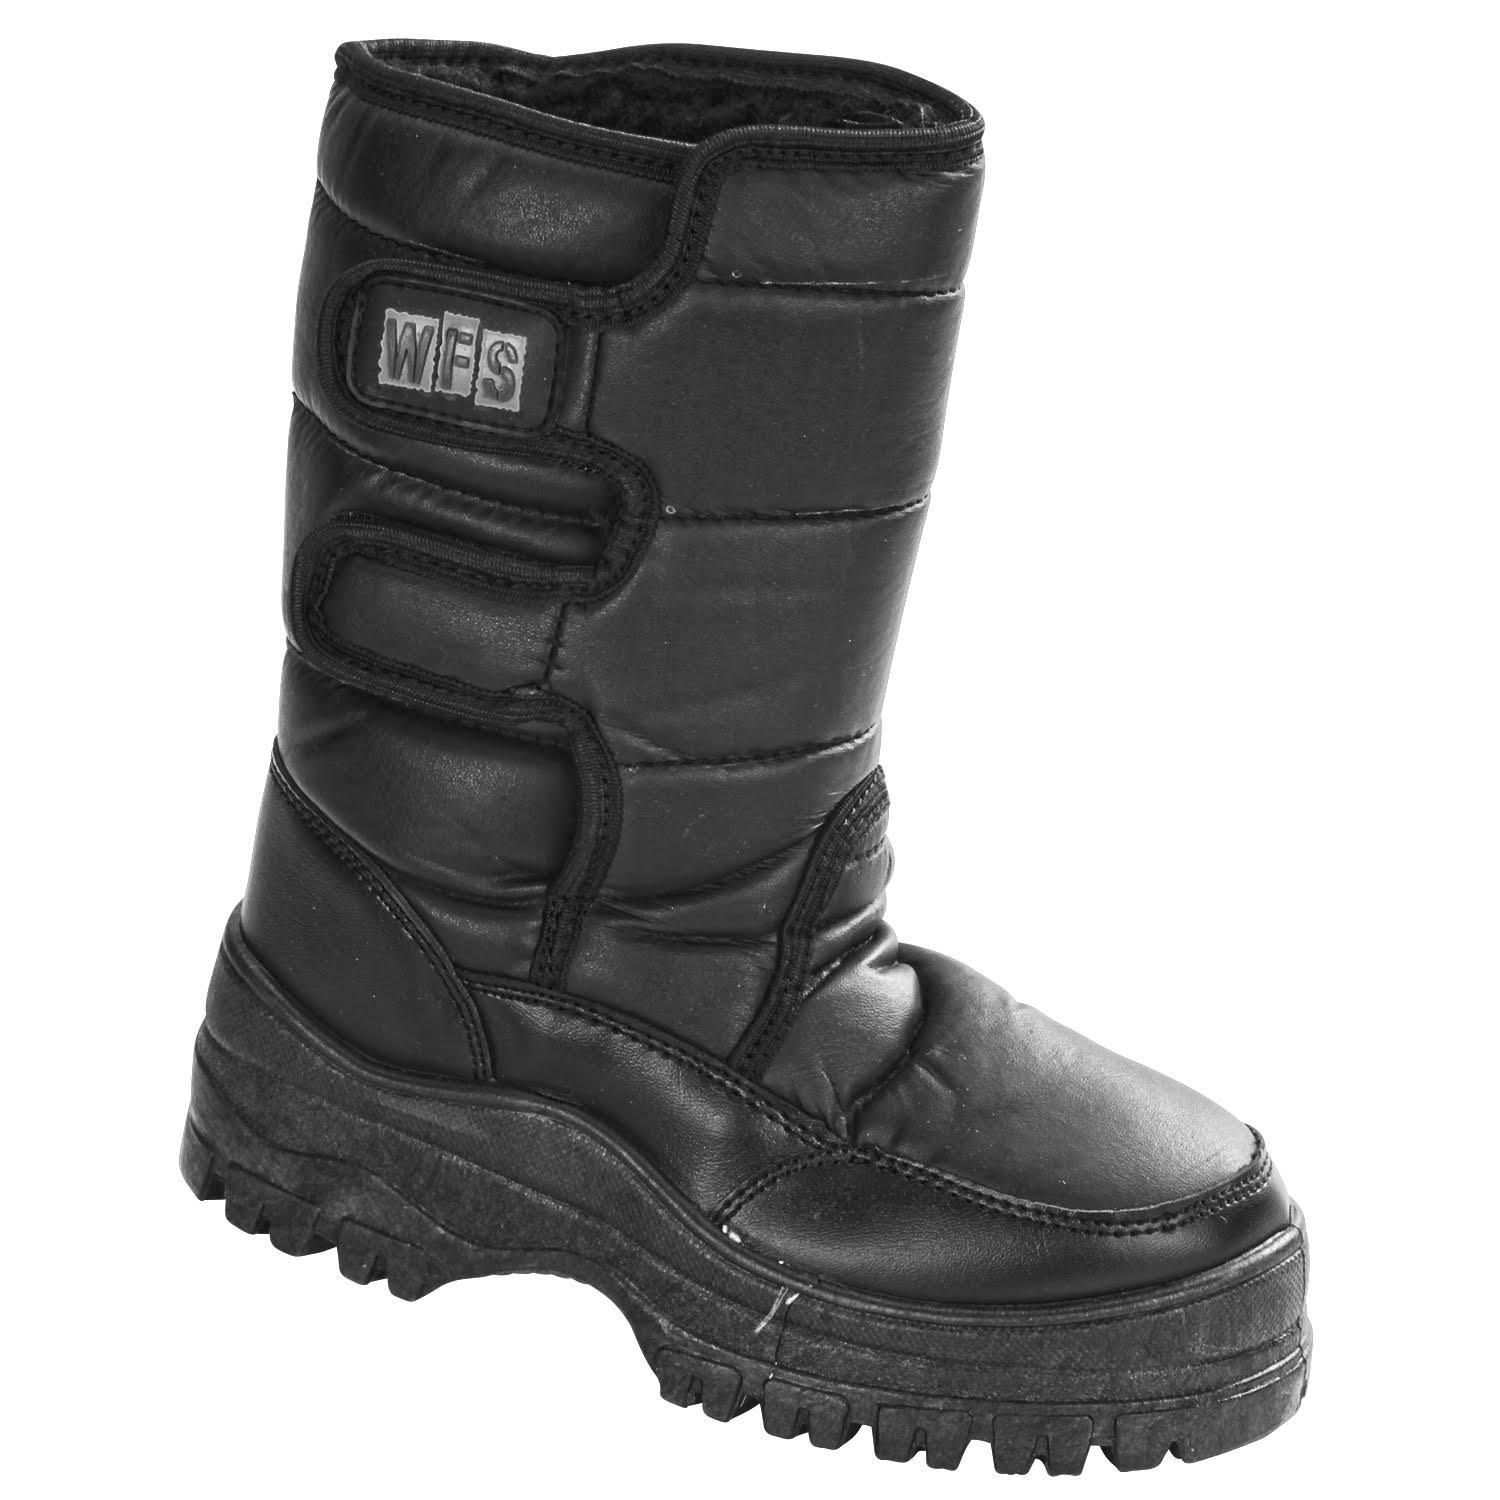 Snow Jogger Youth's Snow Boots World Famous Sports Black